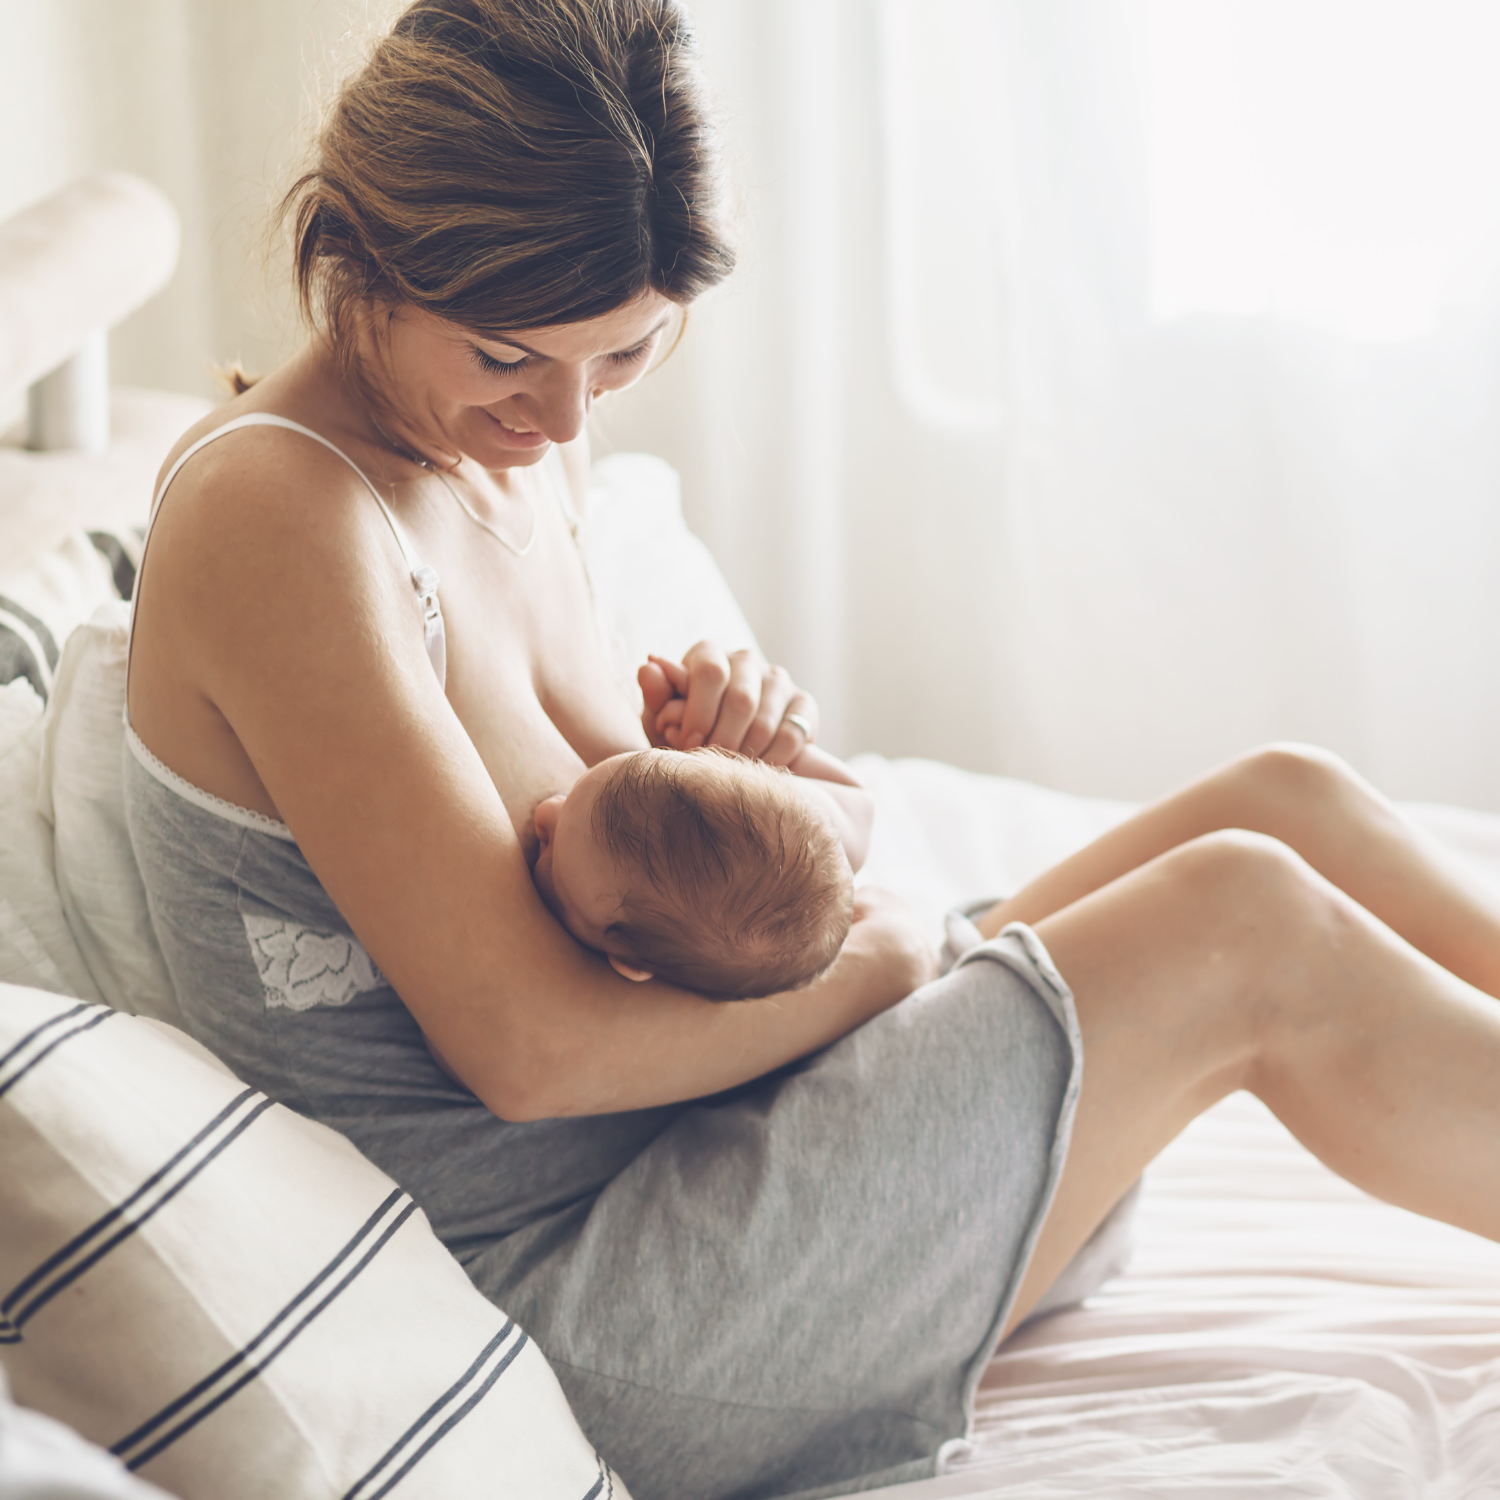 5 Tips for a Smooth C-Section Recovery